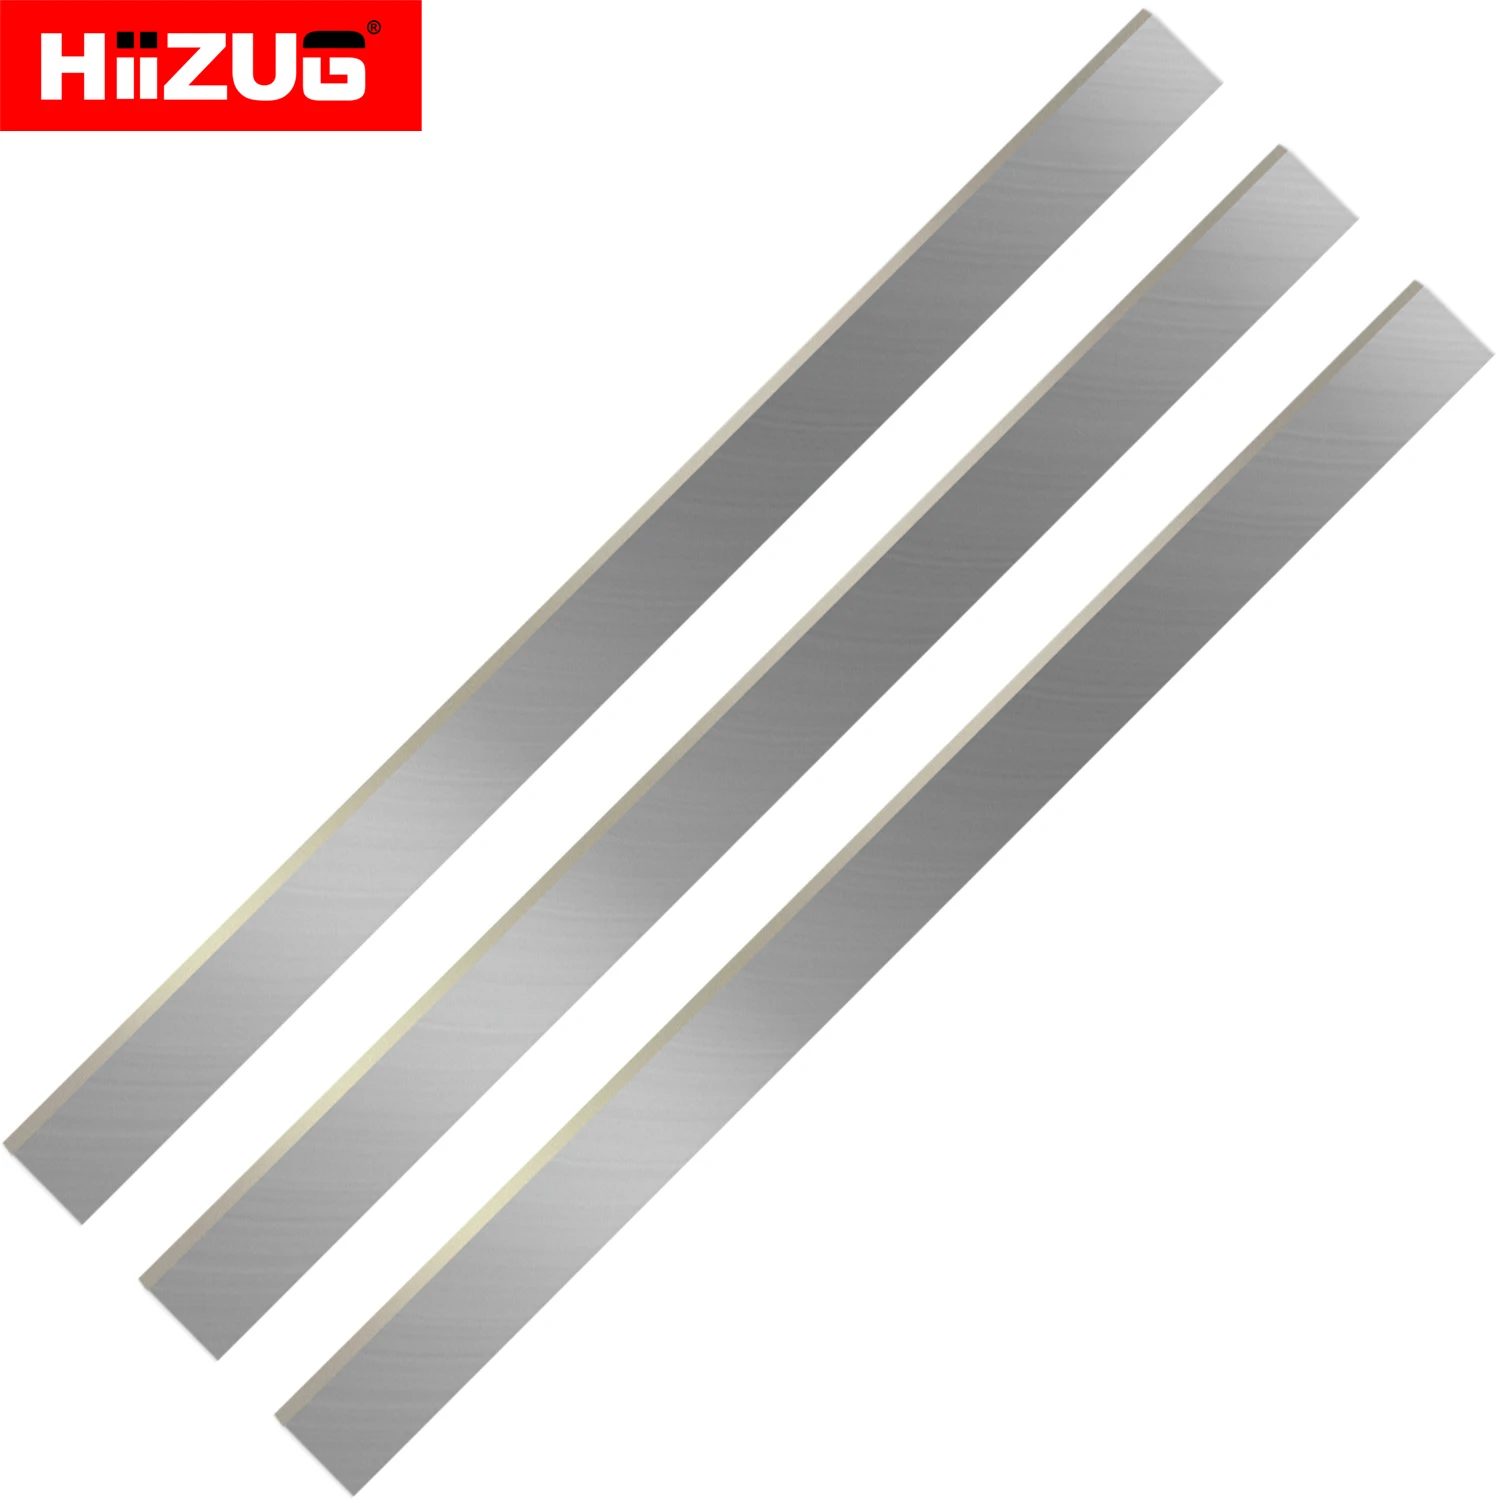 483×25×3mm Planer Blades Knife for 19''  Cutter Heads of Electric Thicknesser Planer Jointer  HSS TCT Set of 3 Pieces 16 inch 408mm×25mm×3mm length planer blades 3 pieces for jet jwp16 helical planner jointer thicknesser machines hss tct